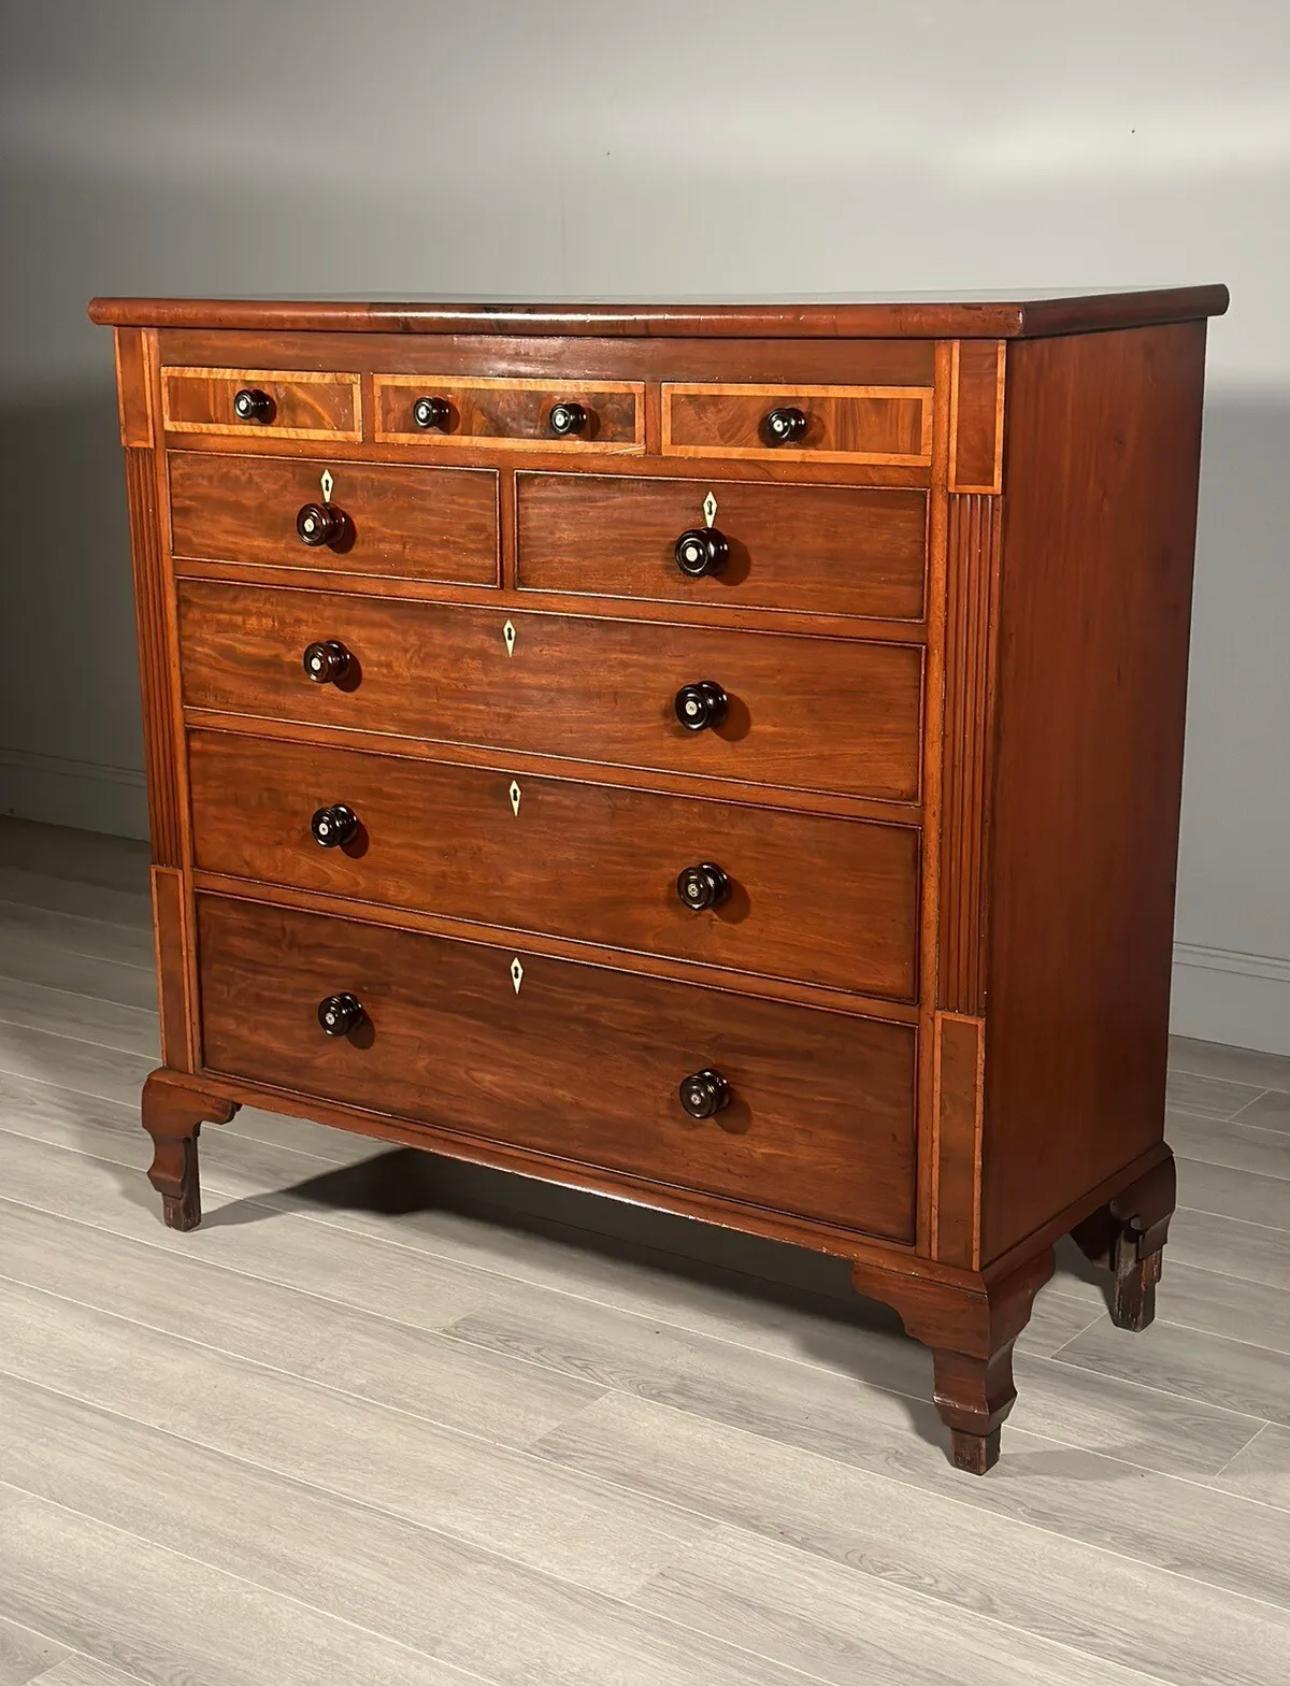 Large Antique Mahogany Chest Of Drawers C.1840 In Good Condition For Sale In Accrington, GB